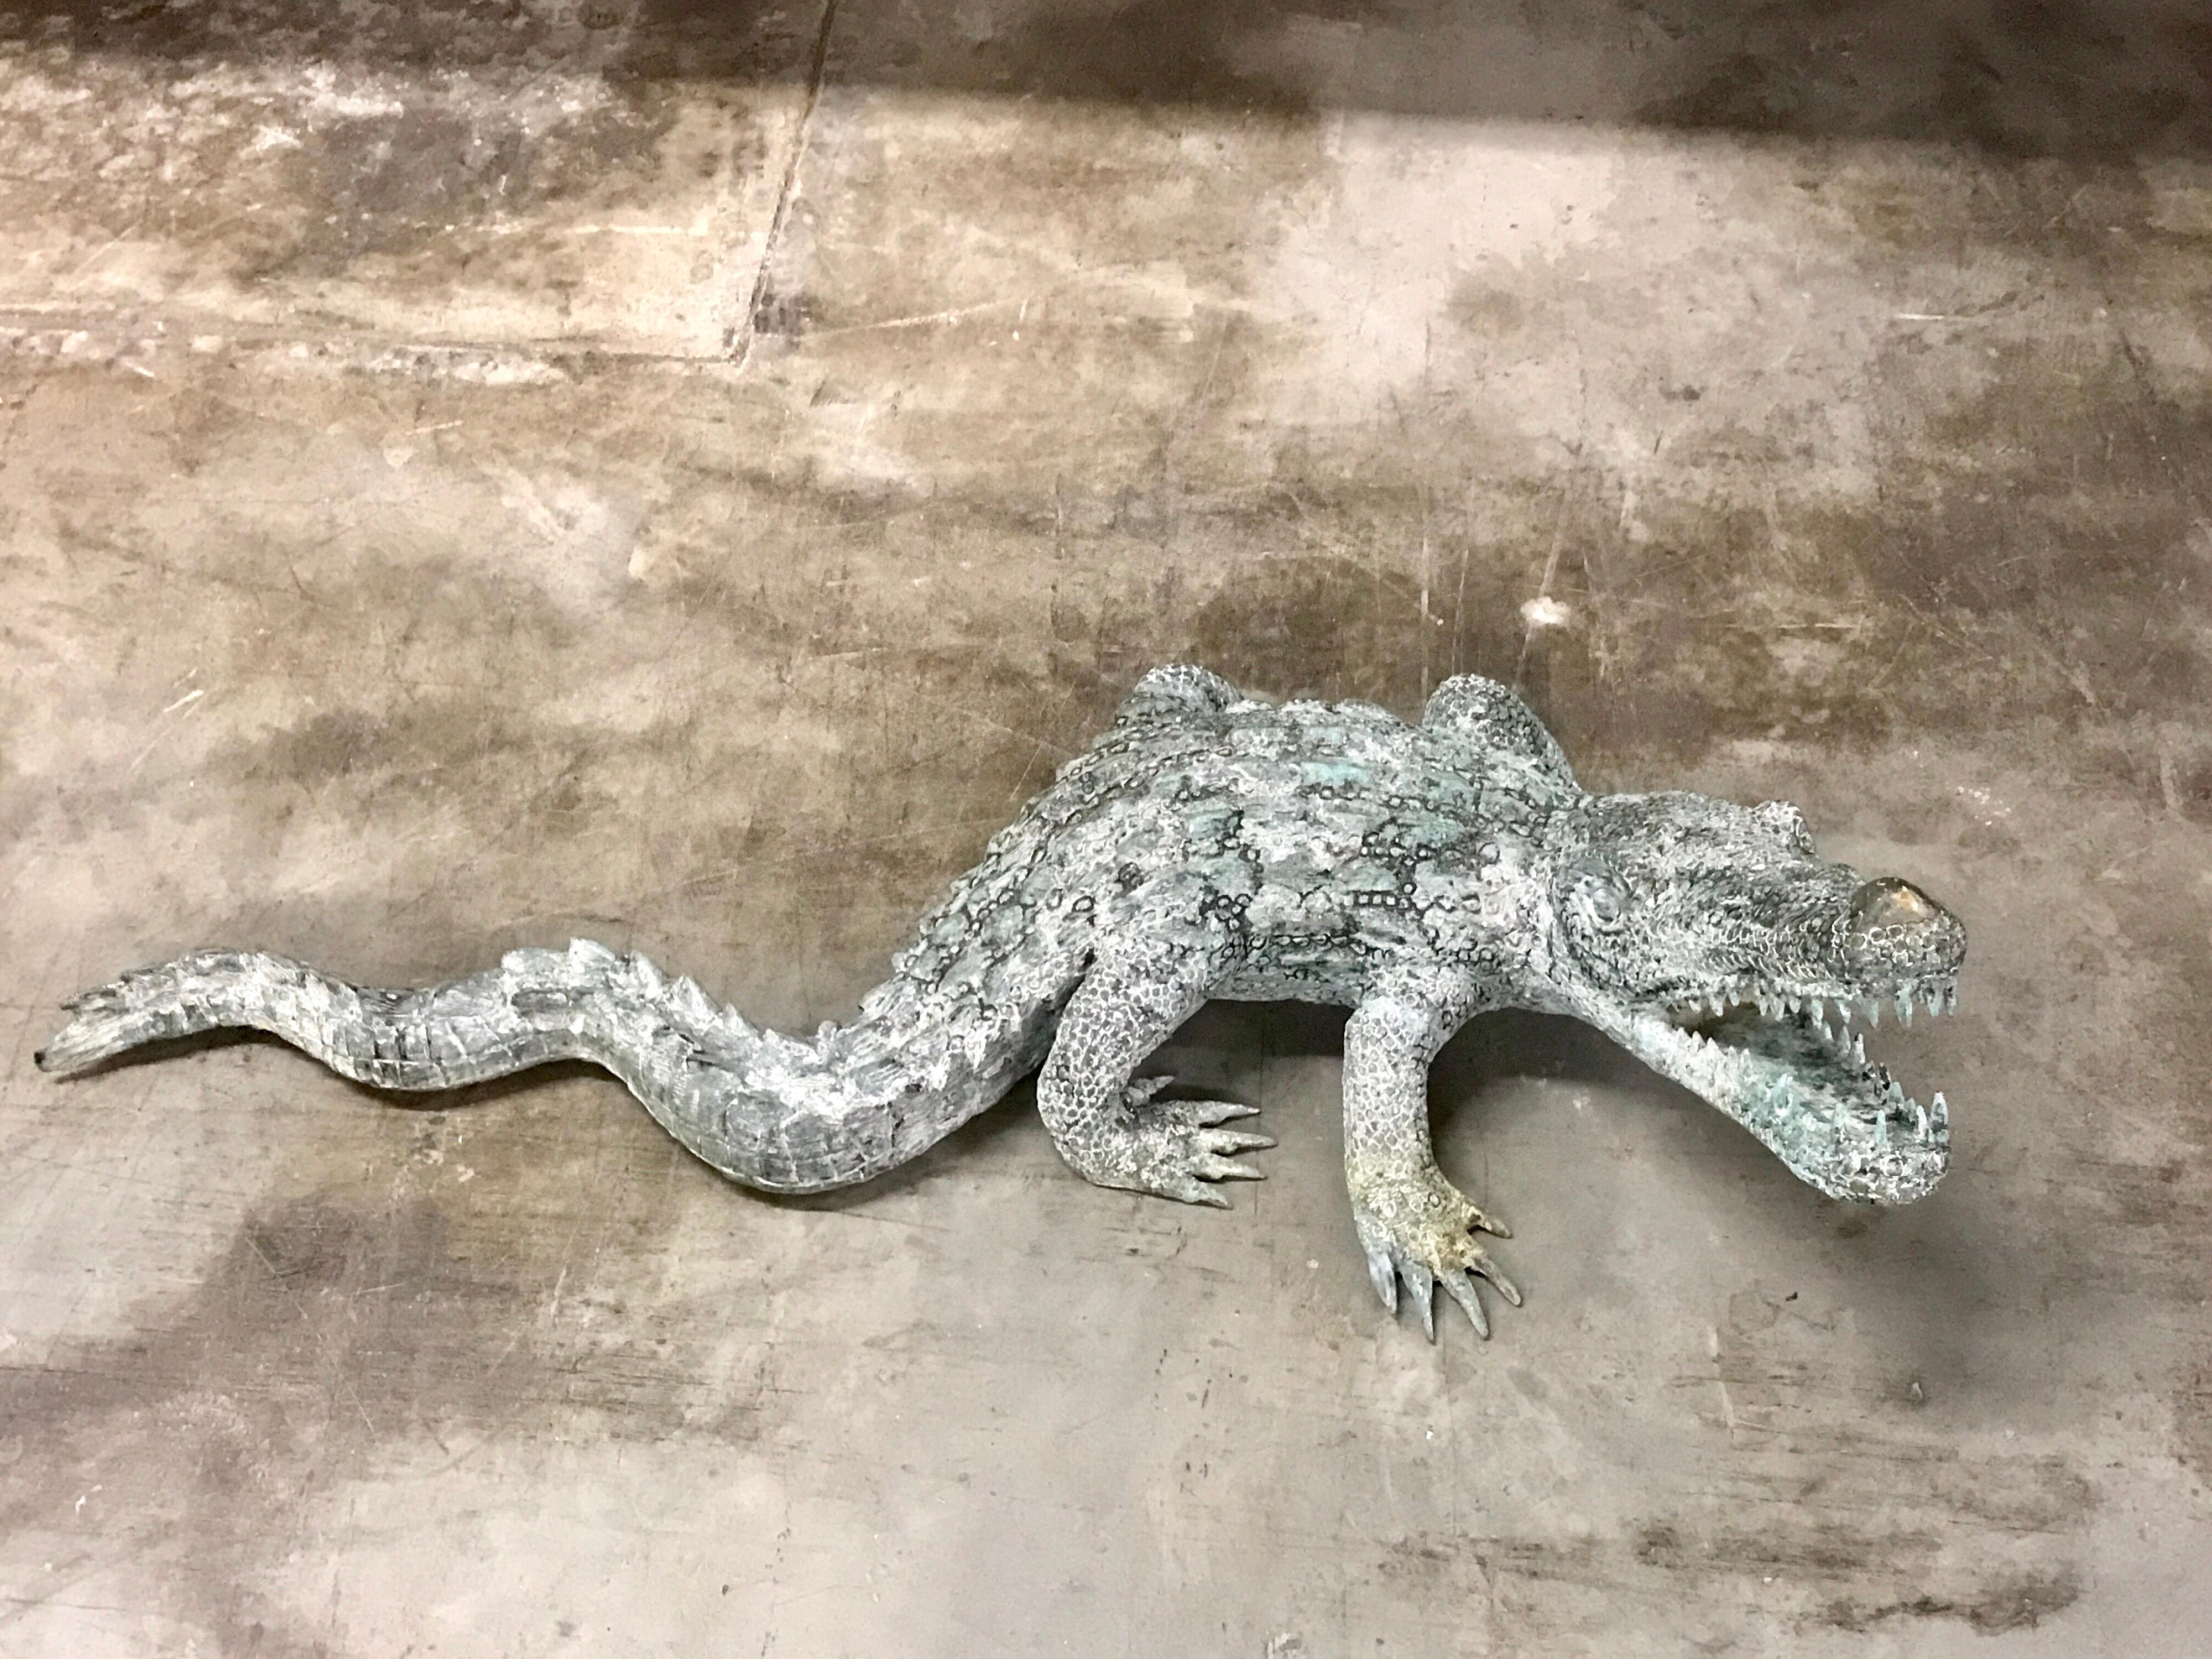 Cast bronze garden sculpture of an alligator, realistically cast with sharp teeth, great for indoor or outdoor use.